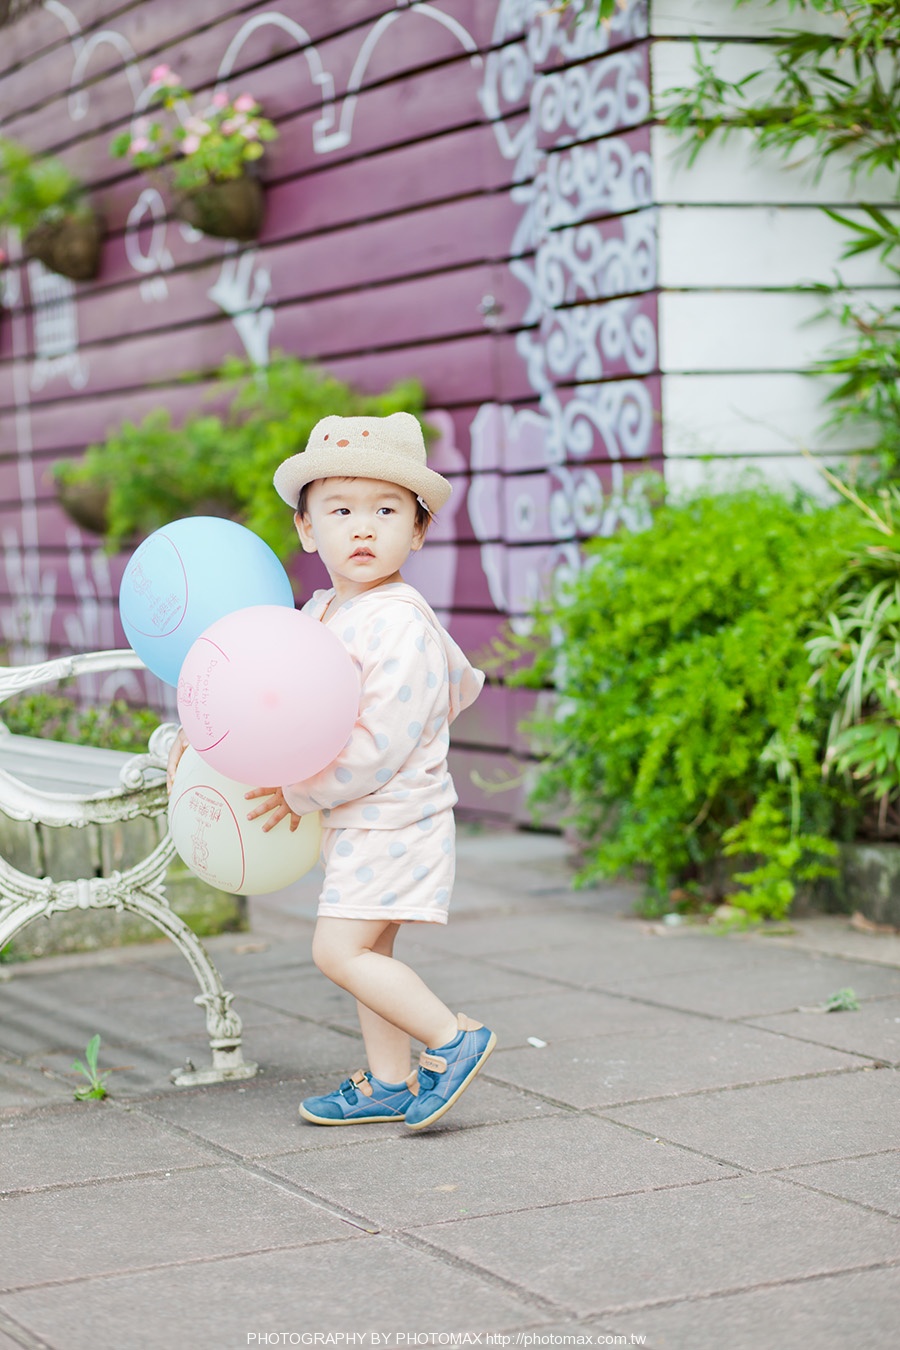 Cute Baby photography 老麦摄影 宝宝摄影 (2)